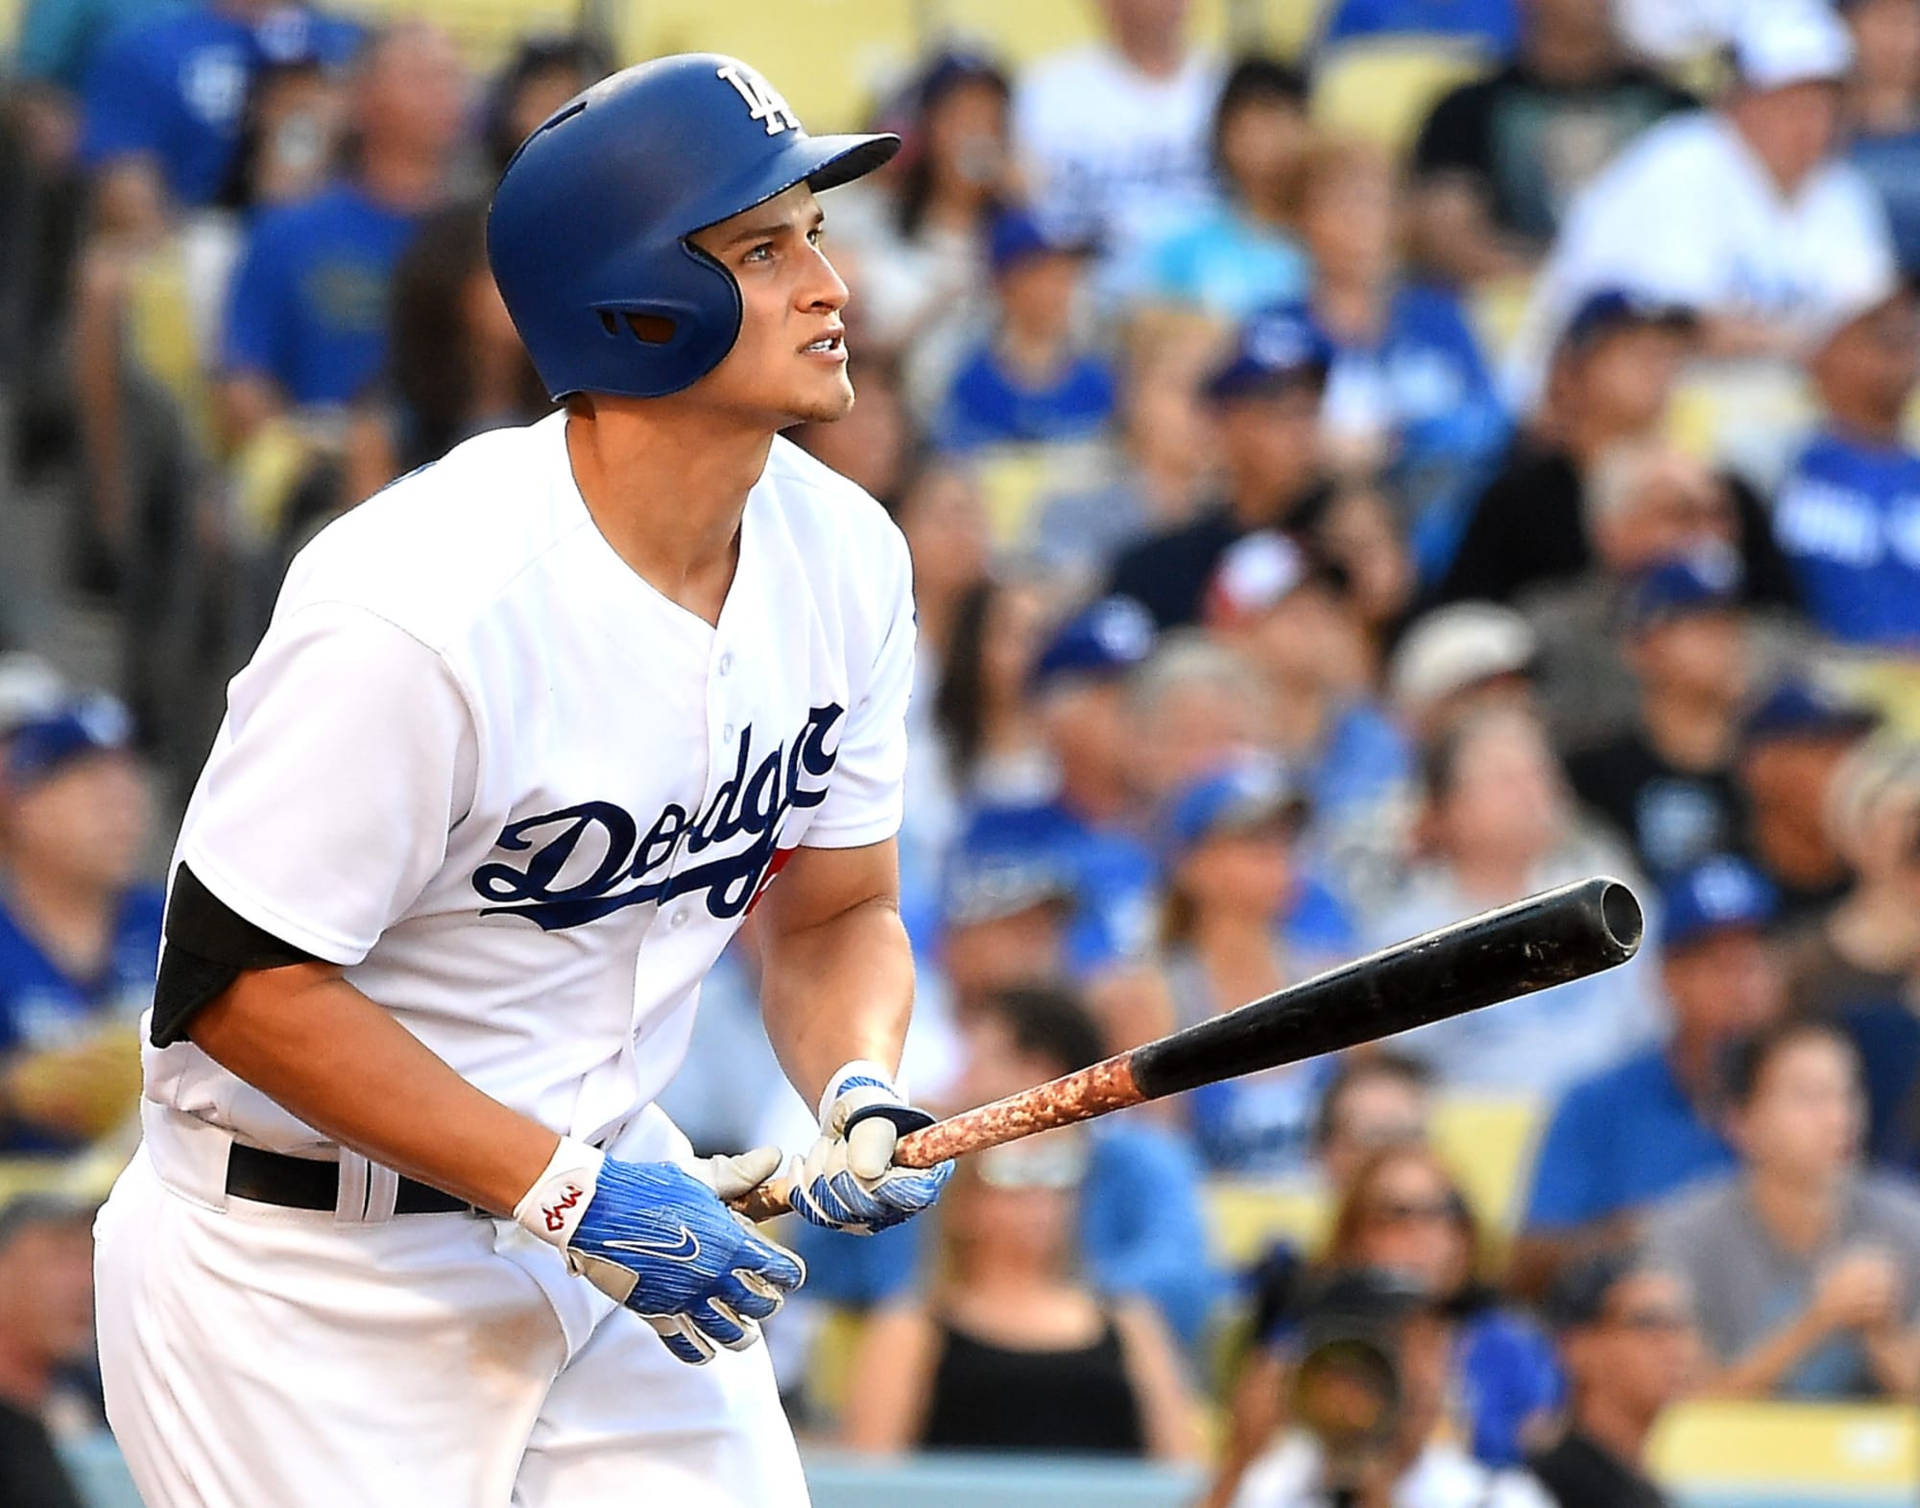 Corey Seager Holding Bat In Front Of Fans